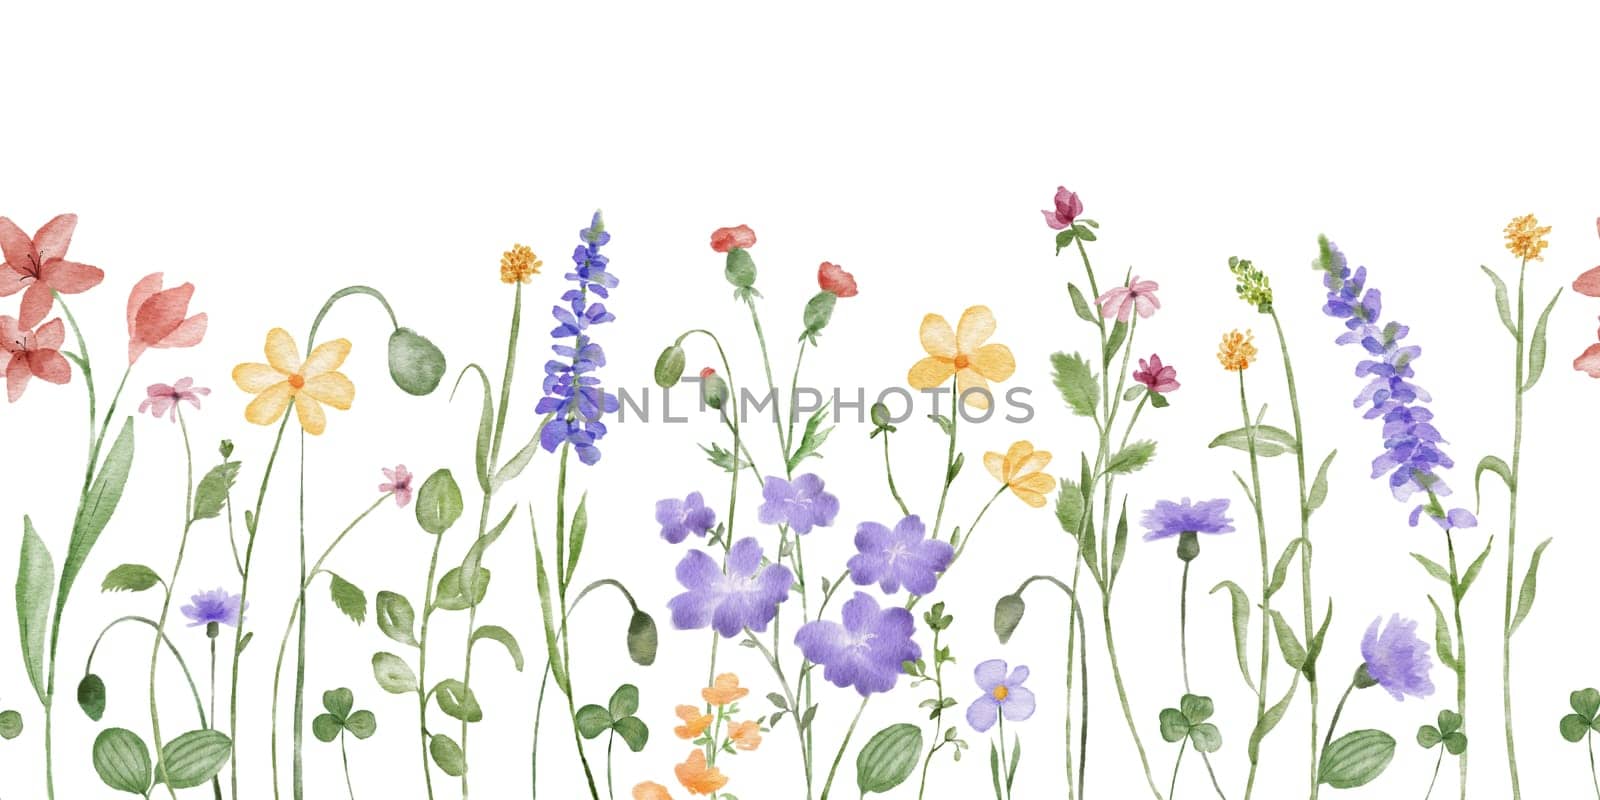 Watercolor floral seamless pattern with wildflowers, plants, leaves and herbs. Horizontal endless border with lavender isolated on white.